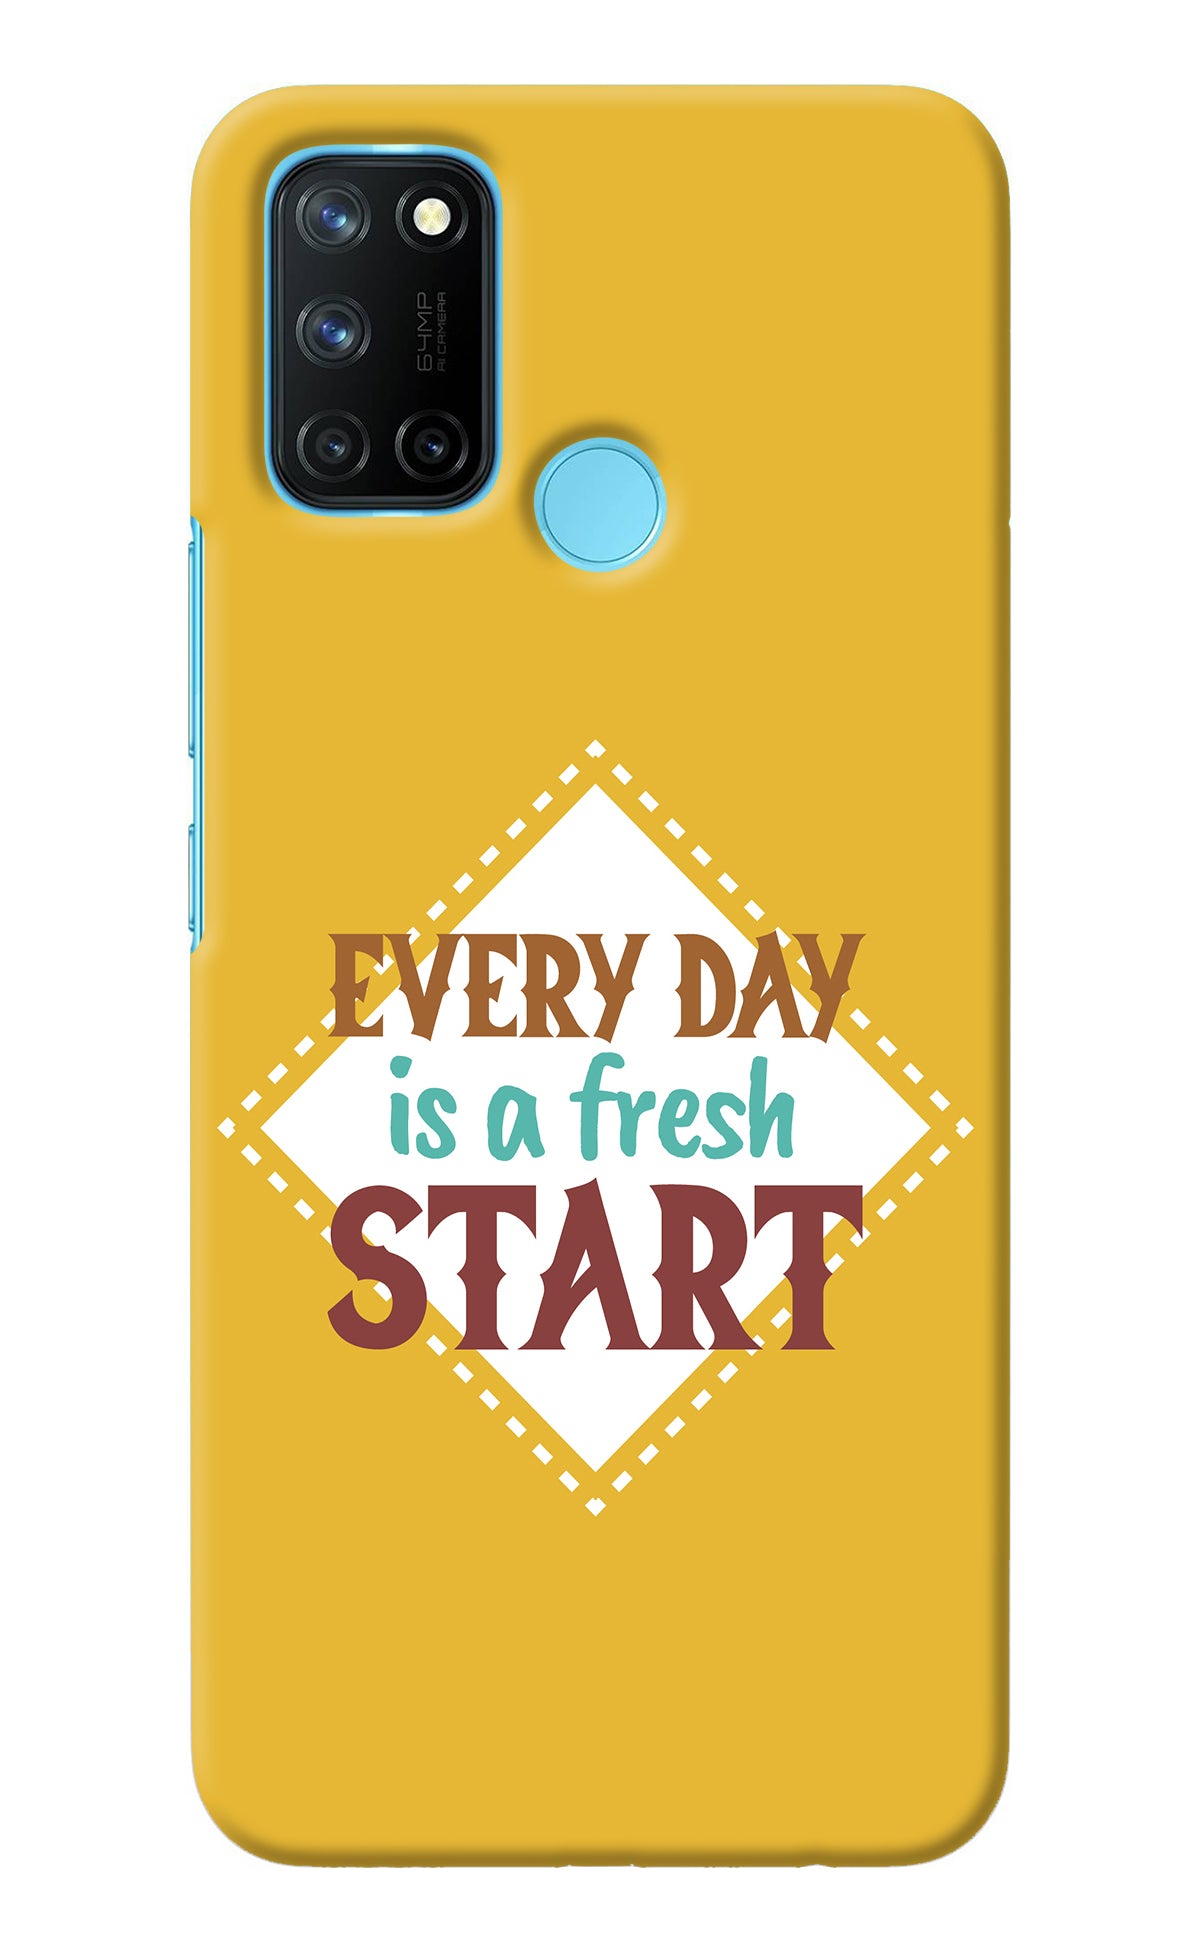 Every day is a Fresh Start Realme C17/Realme 7i Back Cover